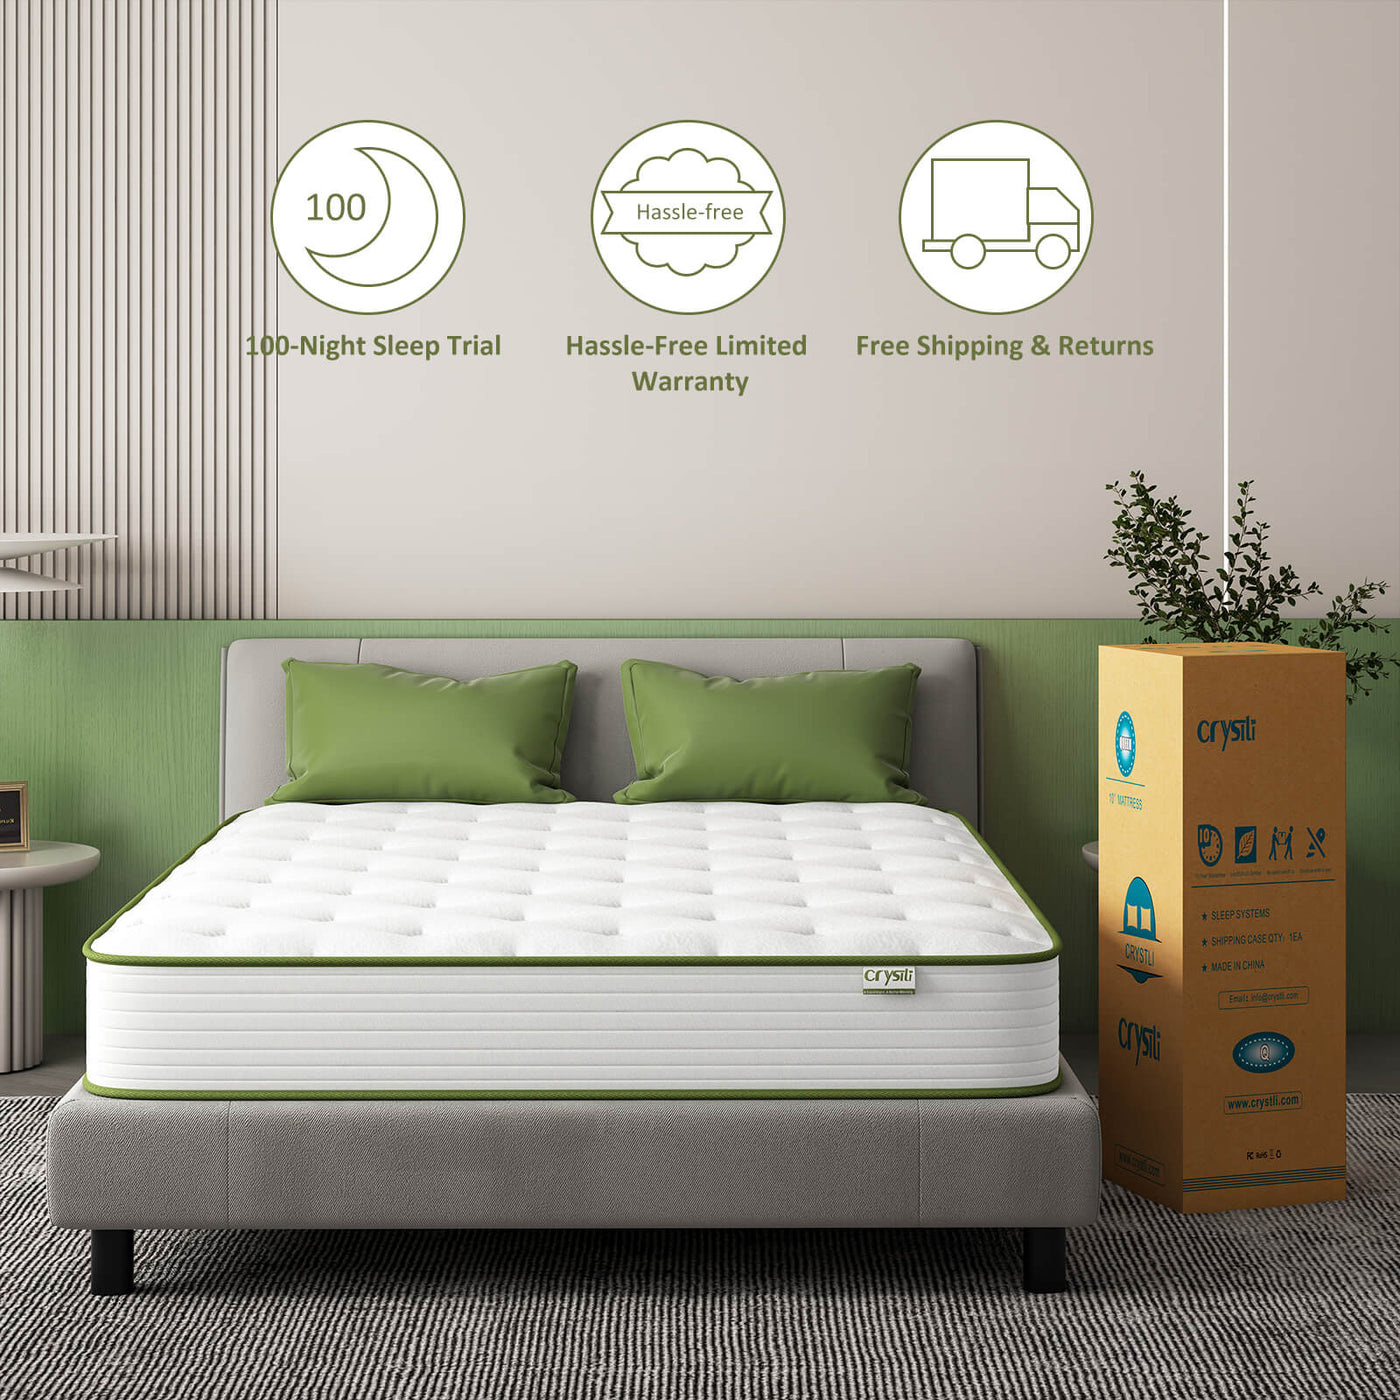 Full Mattress, Crystli 10 Inch Responsive Memory Foam Double Mattress  Hybrid Innerspring Mattress in a Box Sleep Cooler with More Pressure Relief  & Support : : Home